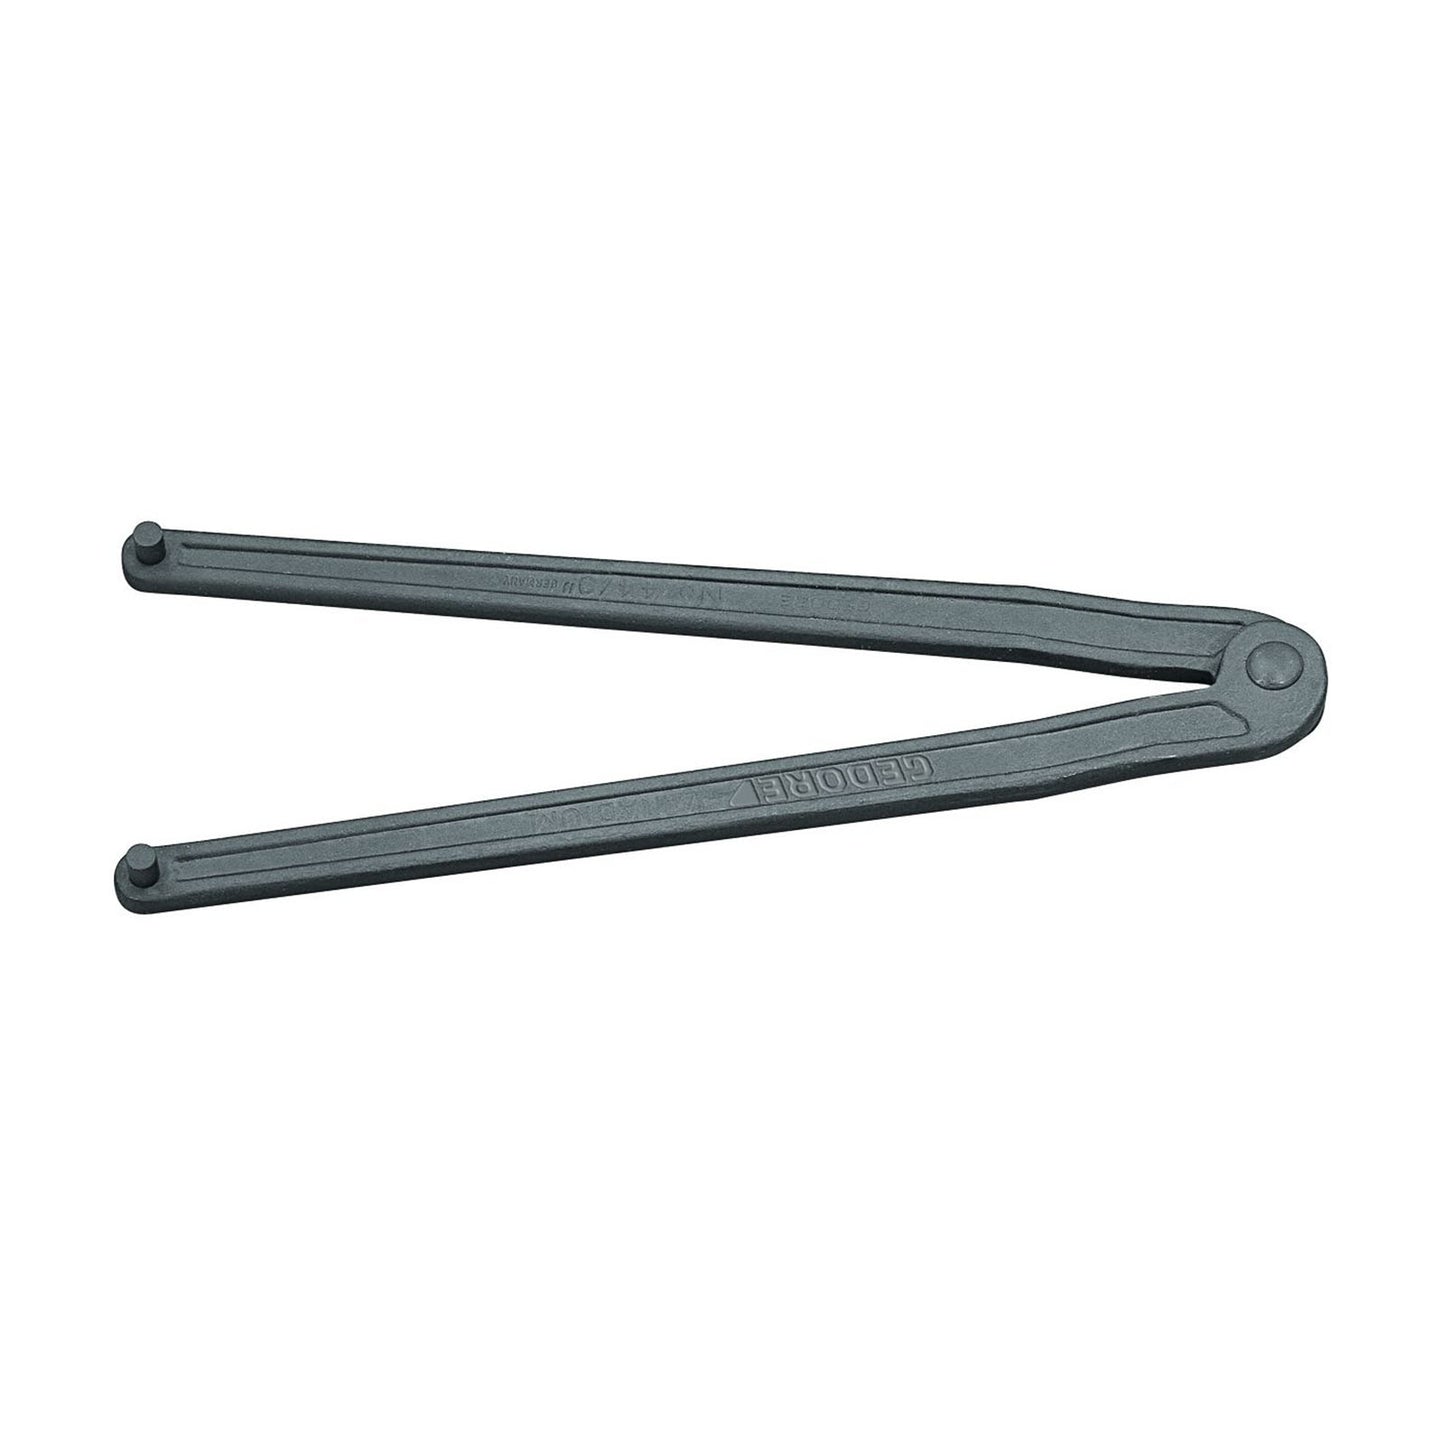 GEDORE 44 4 - Double Pivot Wrench, 4mm (6354560)